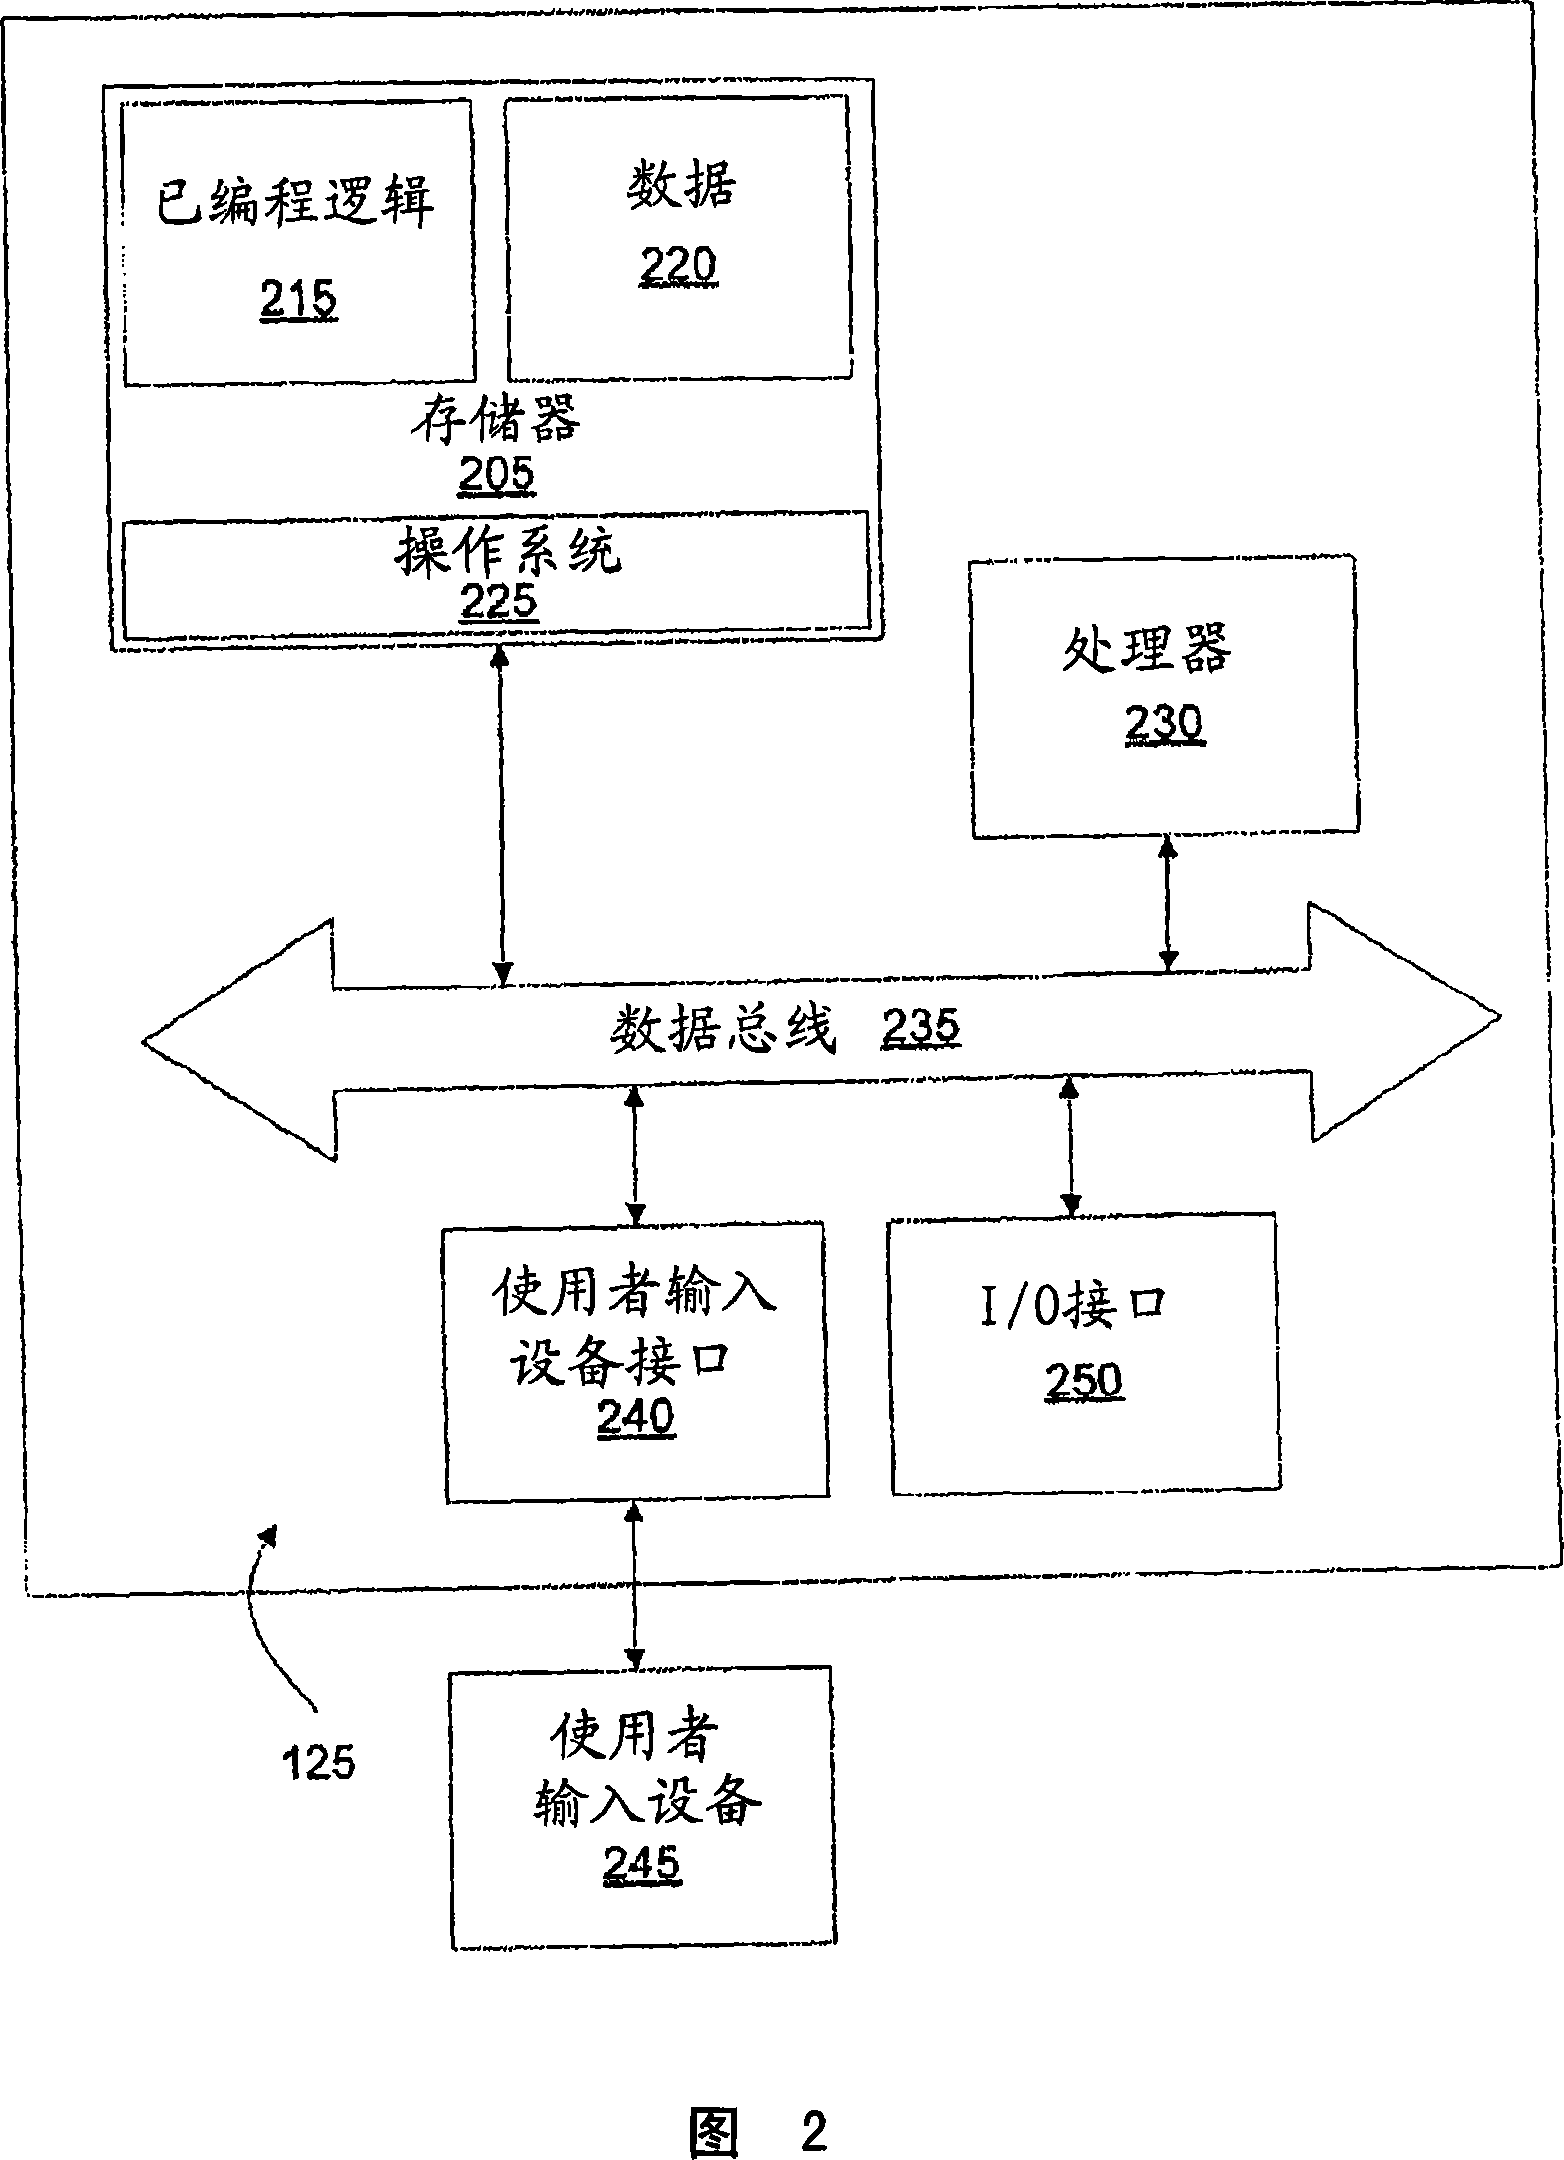 Systems and methods for detecting undesirable operation of a turbine